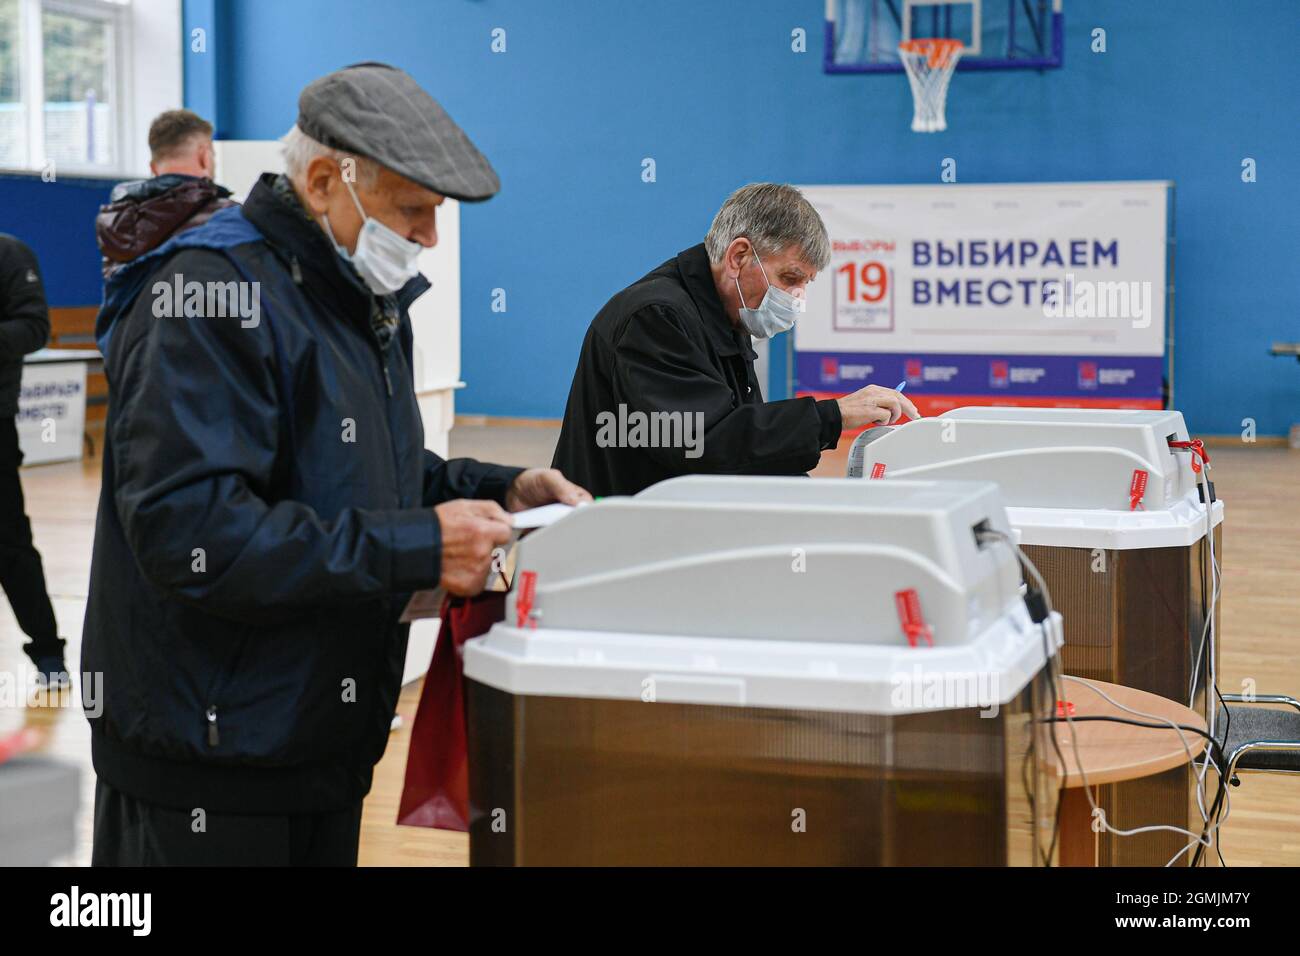 Russian voting